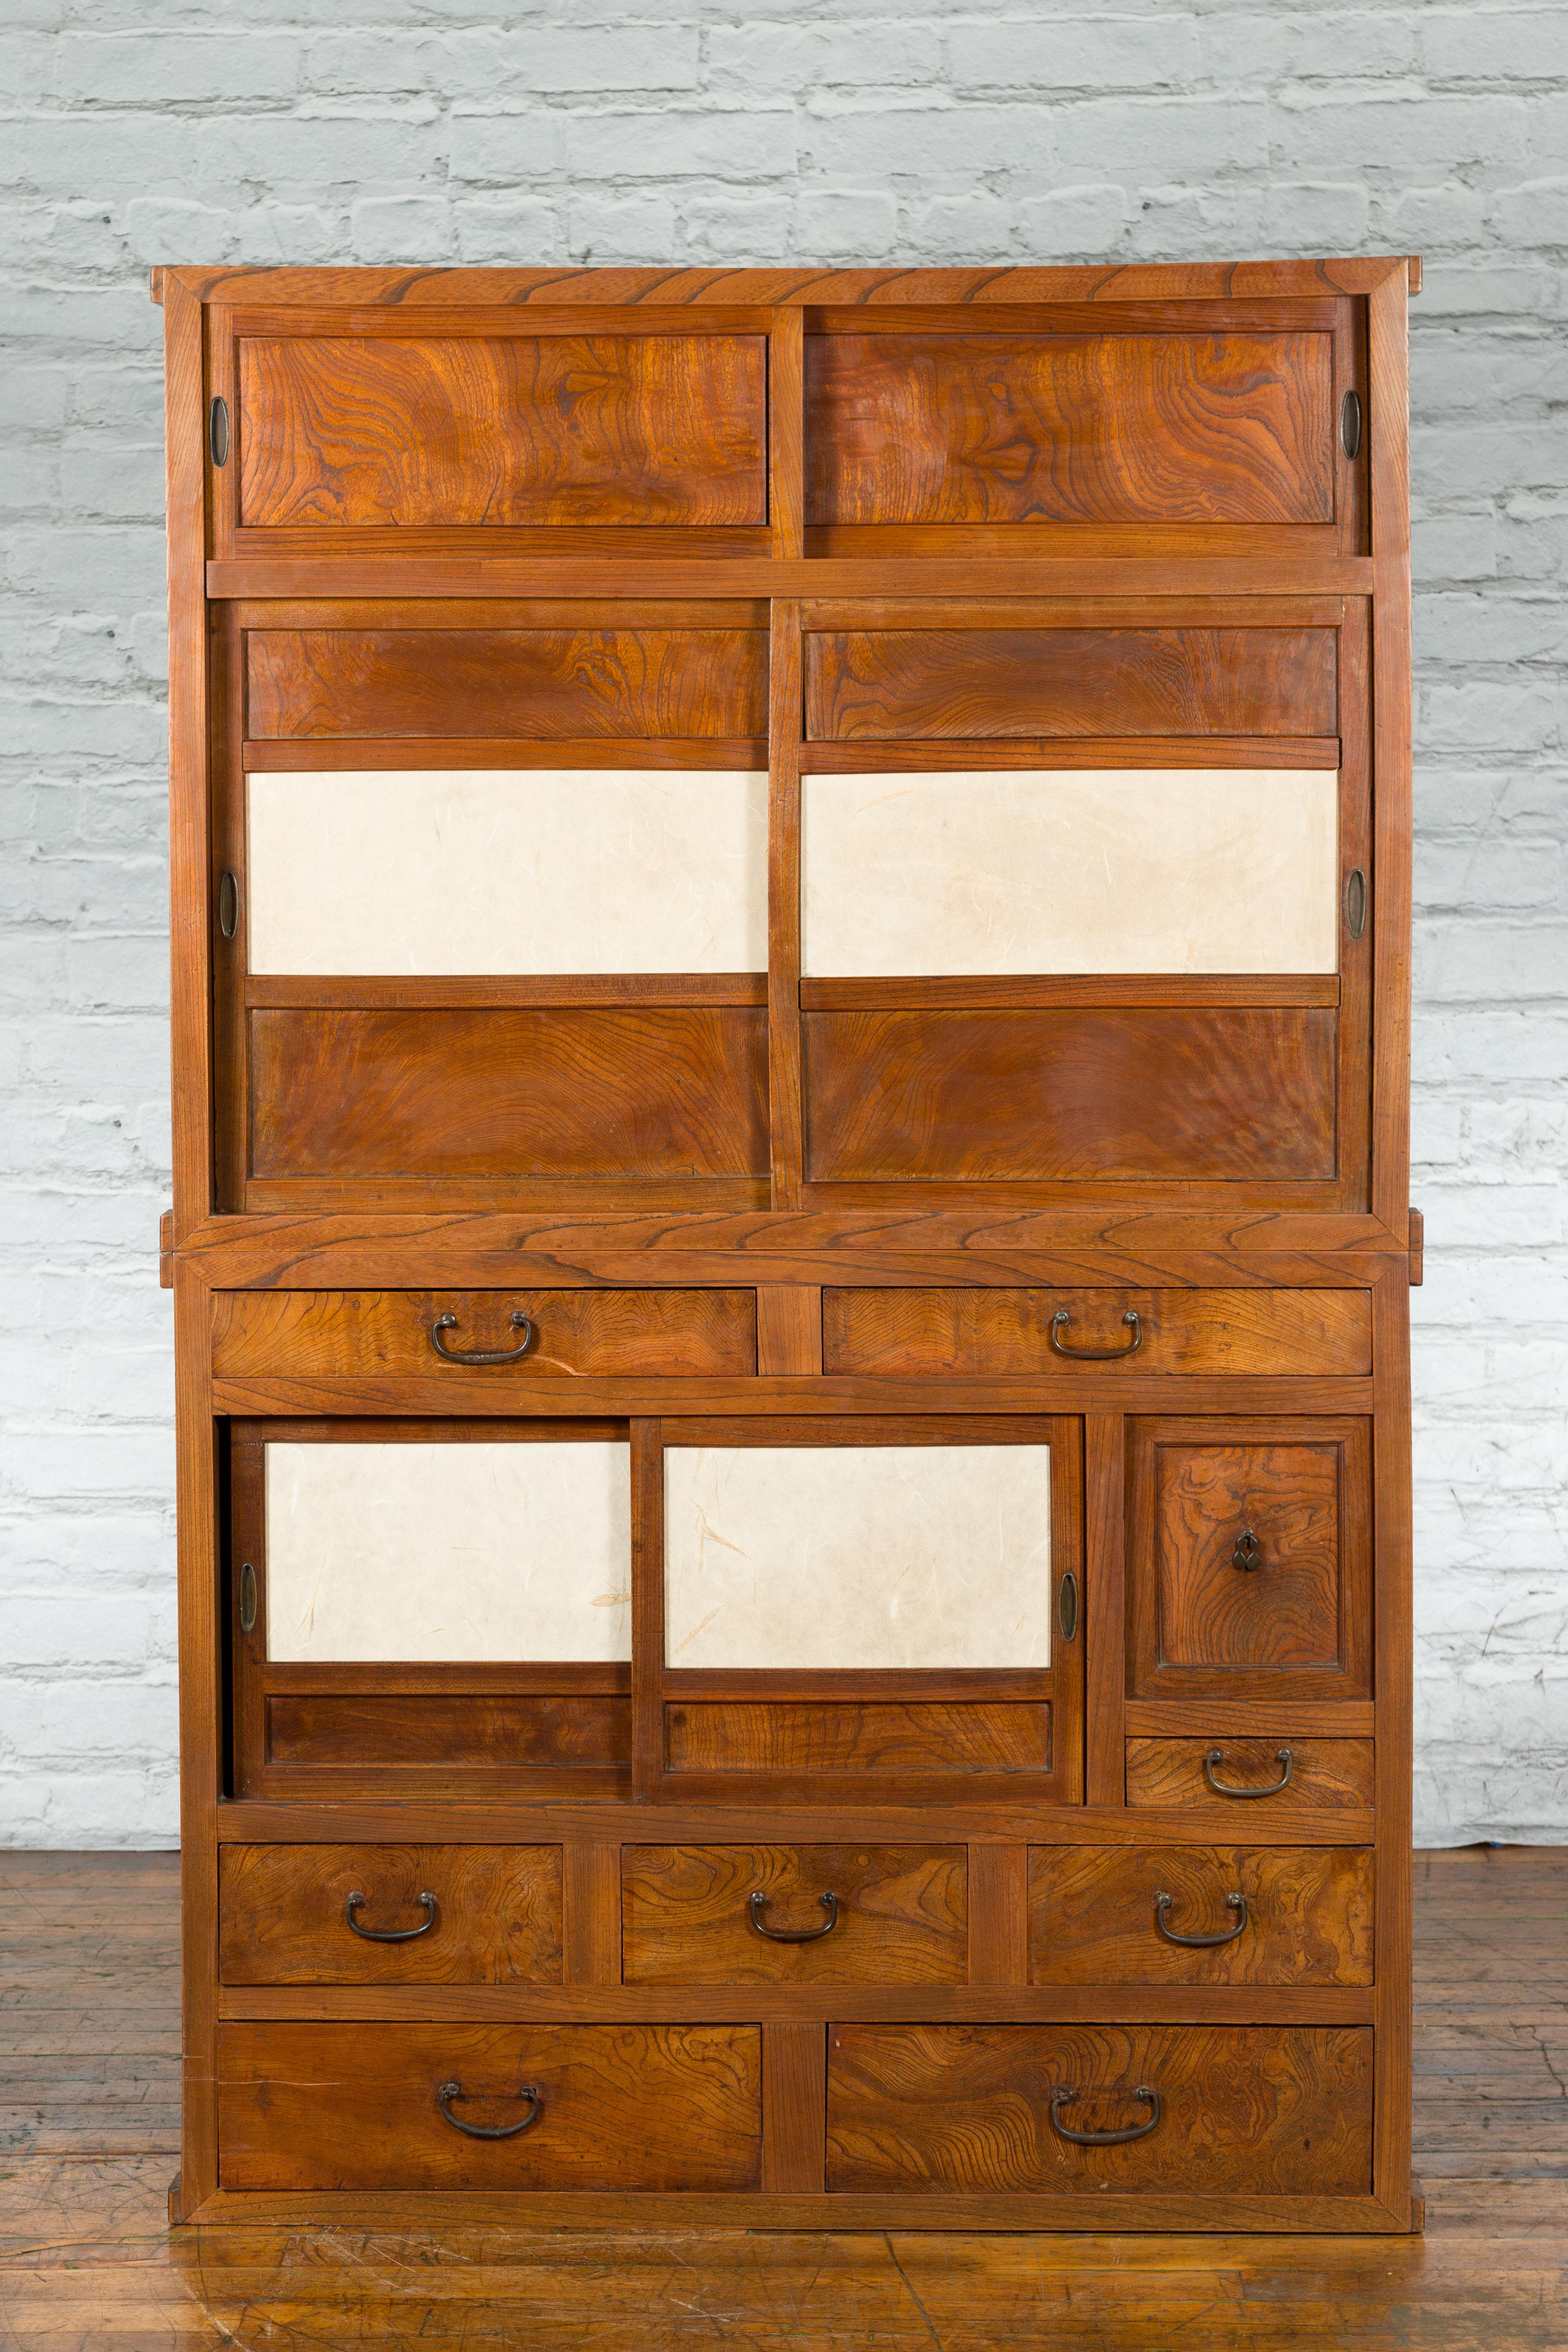 A Japanese Meiji period kiri wood two-part kitchen cabinet in the Kanto style with sliding doors, parchment paper and drawers. Created in Japan during the Meiji era, this Kanto style kiri wood cabinet features a linear silhouette perfectly accented